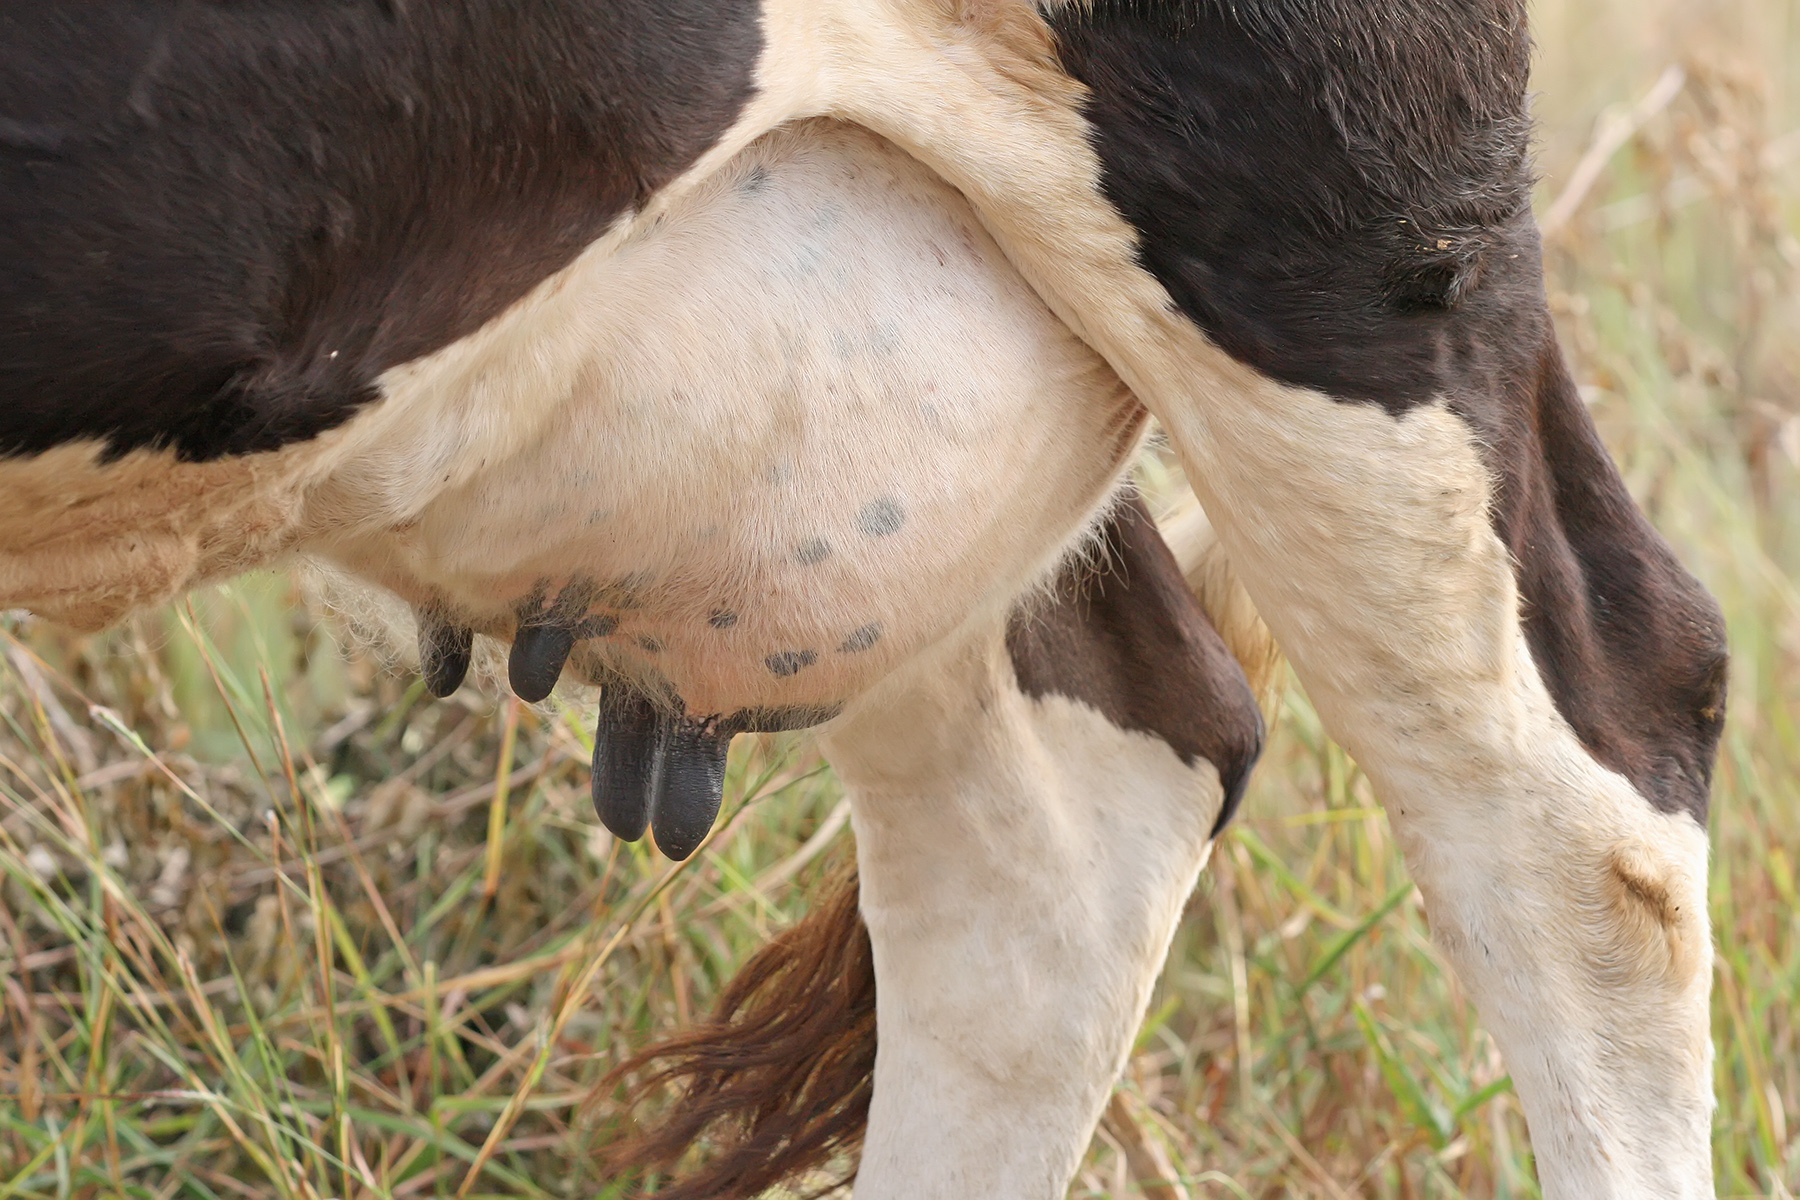 Where are the teats located on a dairy cow?